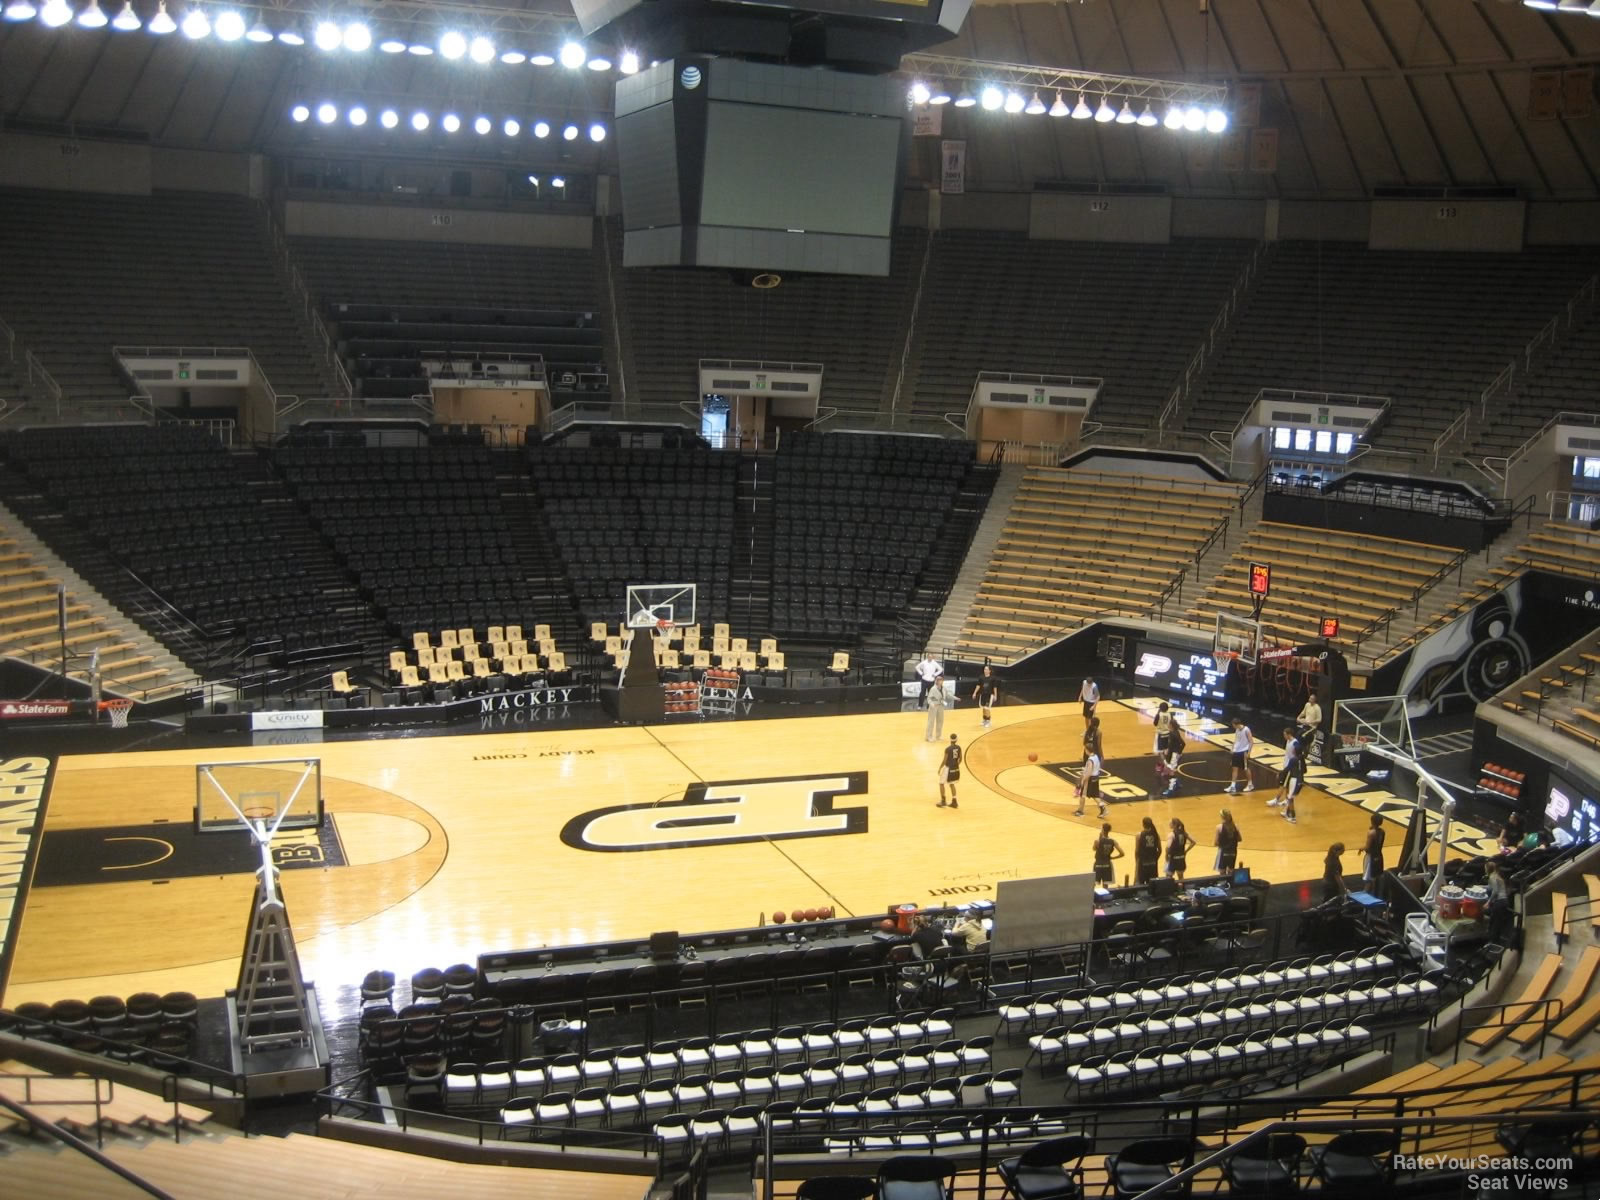 section 103, row 10 seat view  - mackey arena